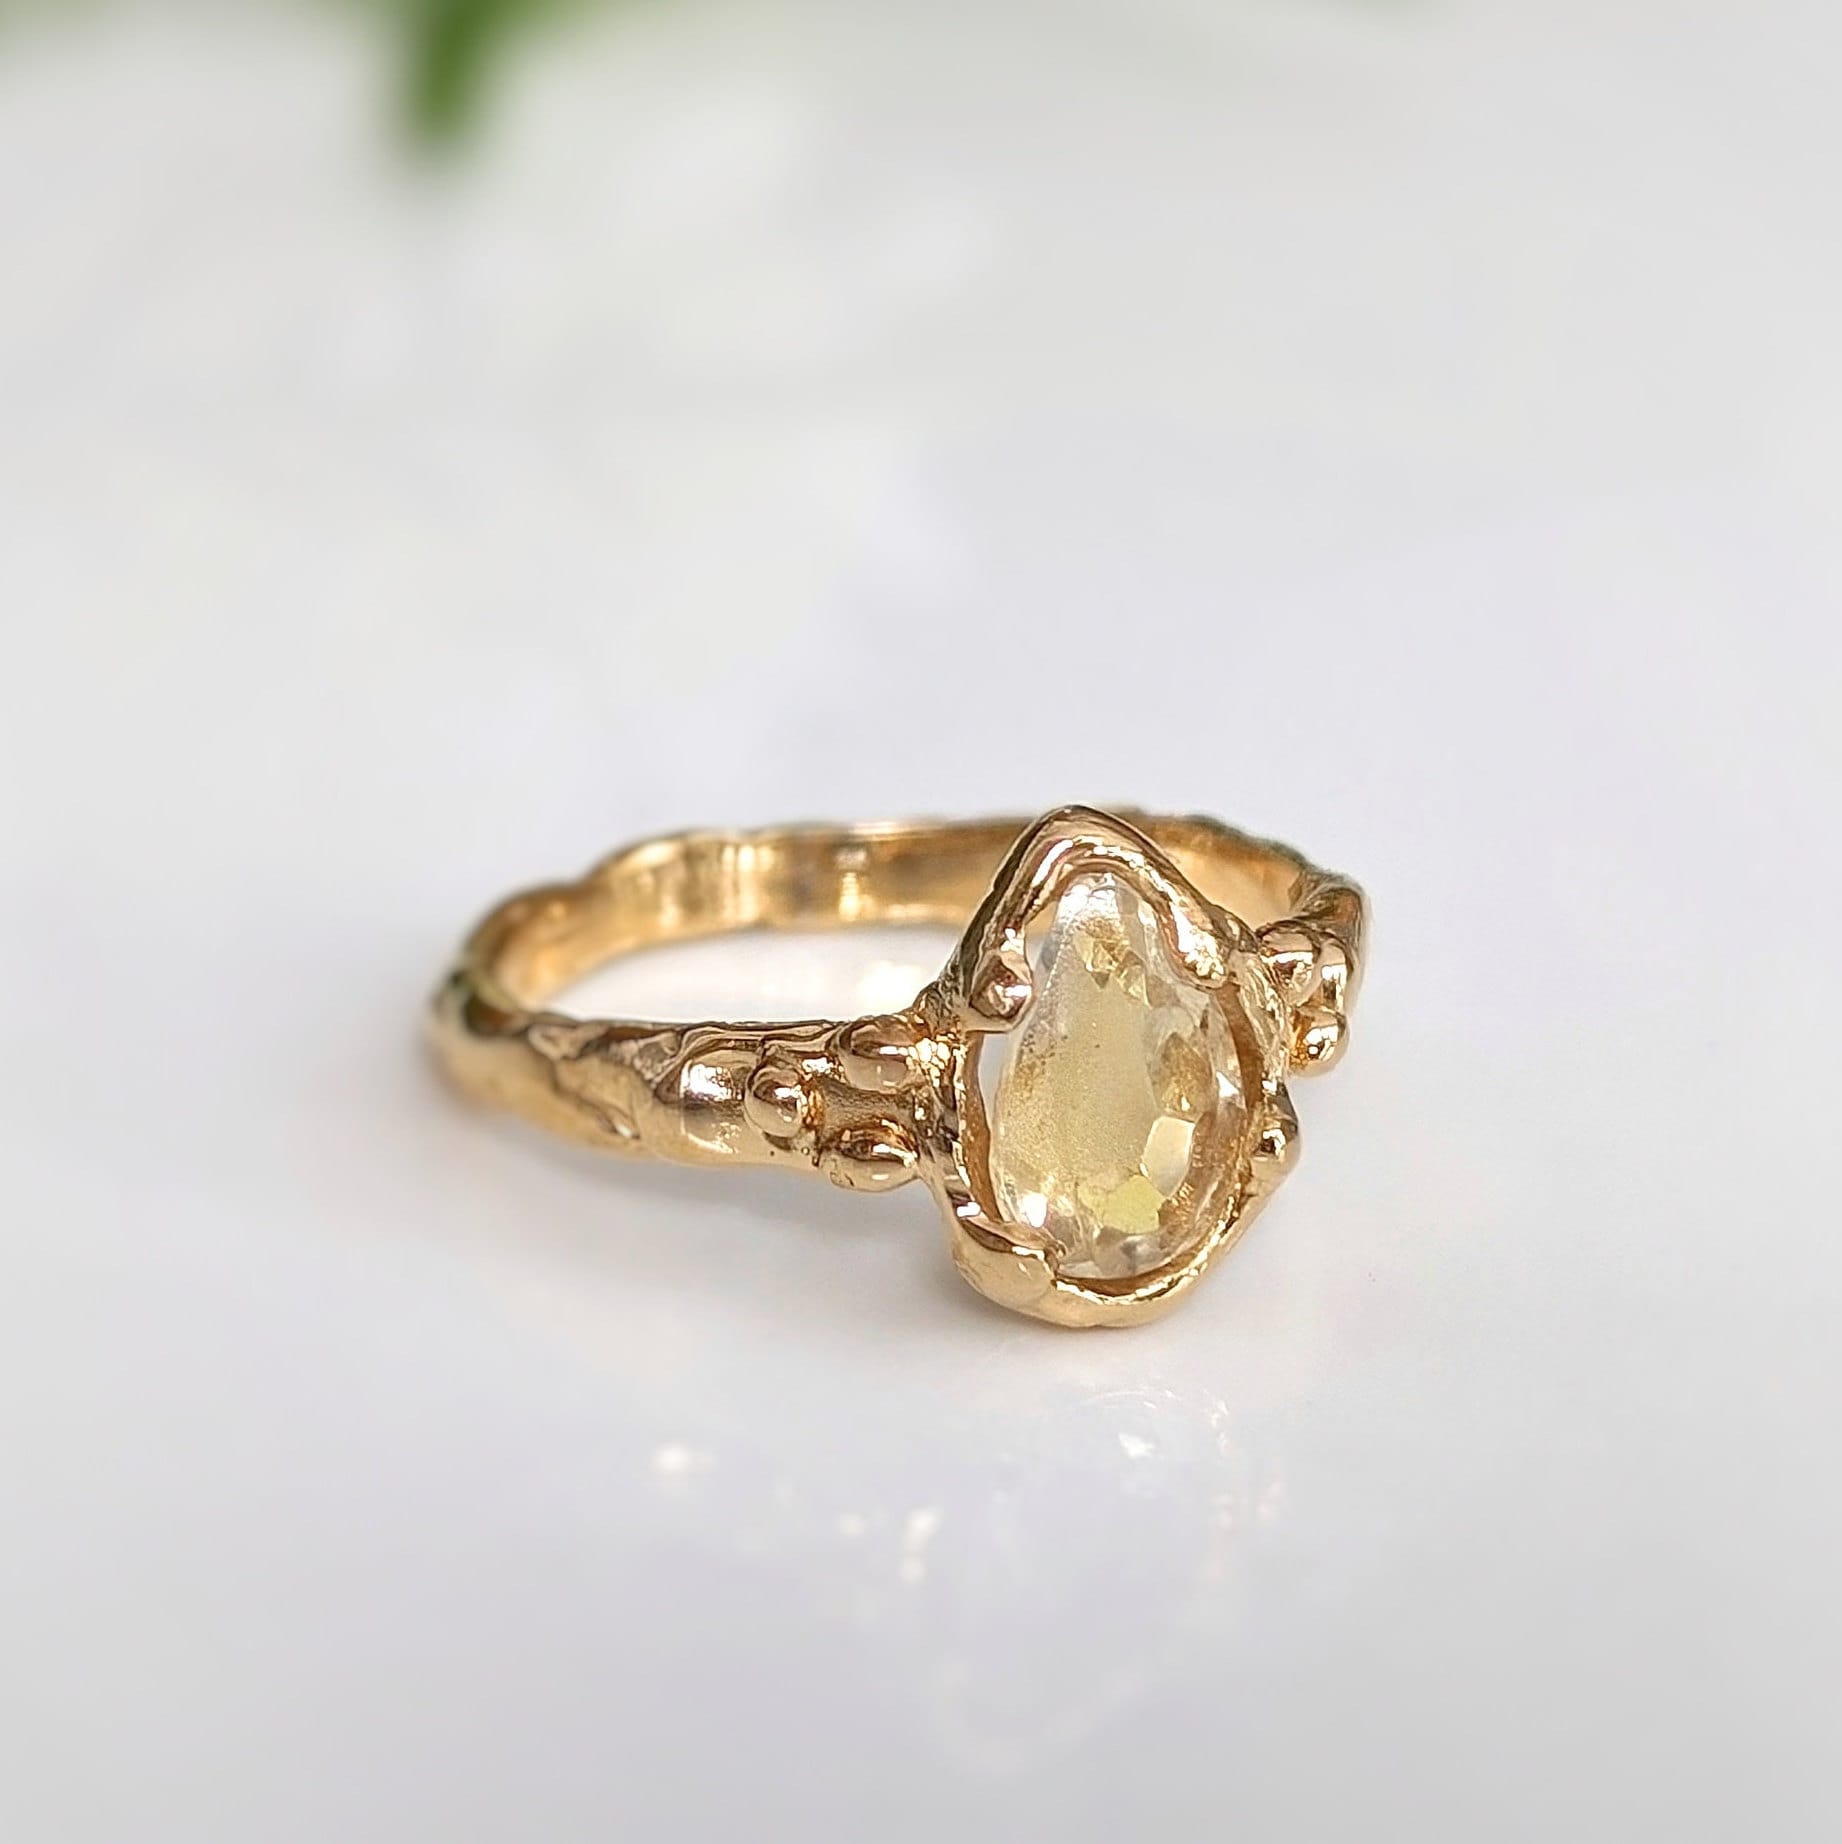 Large Pear shape Citrine set by prongs on a Solid 14k Gold Molten textured band